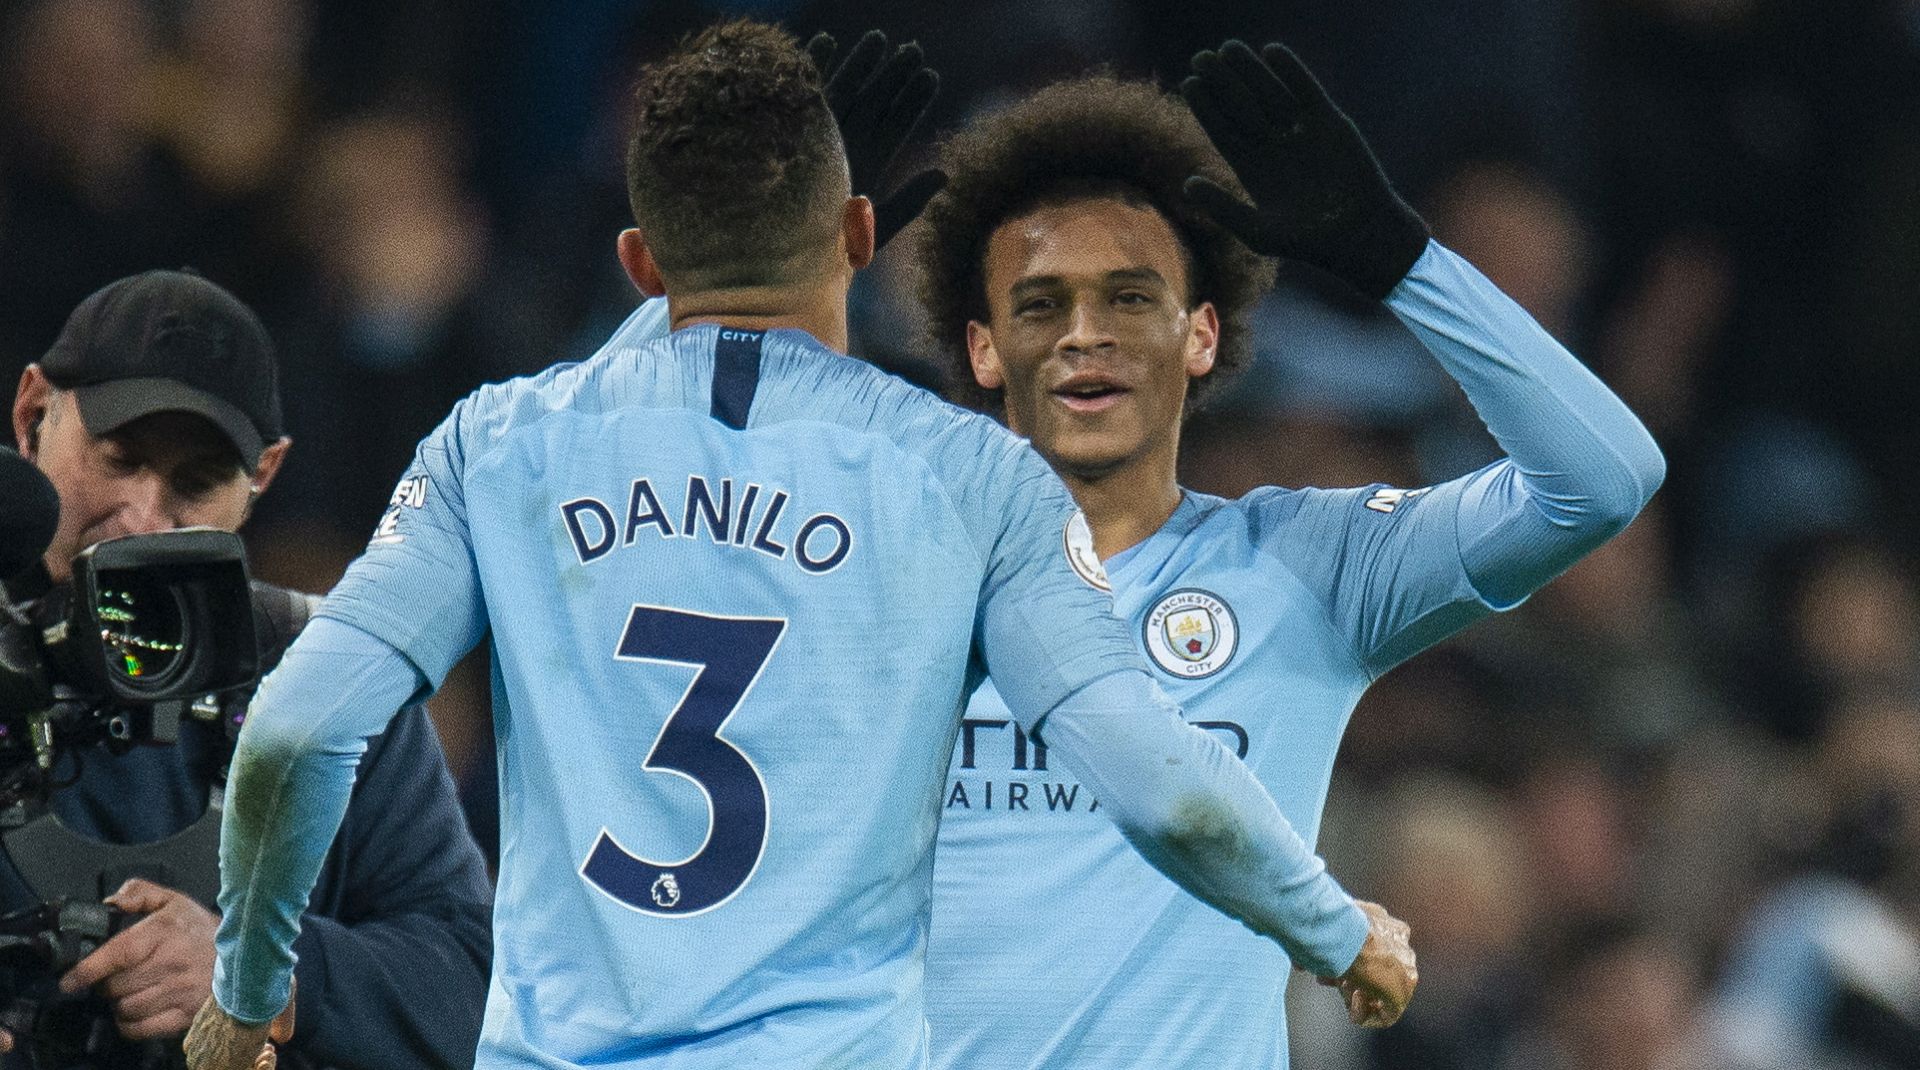 epa07260629 Manchester City's Leroy Sane (R) reacts with Manchester City's Danilo after winning the English Premier League soccer match between Manchester City and Liverpool at the Etihad Stadium in Manchester, Britain, 03 January 2019.  EPA/PETER POWELL EDITORIAL USE ONLY. No use with unauthorized audio, video, data, fixture lists, club/league logos or 'live' services. Online in-match use limited to 120 images, no video emulation. No use in betting, games or single club/league/player publications